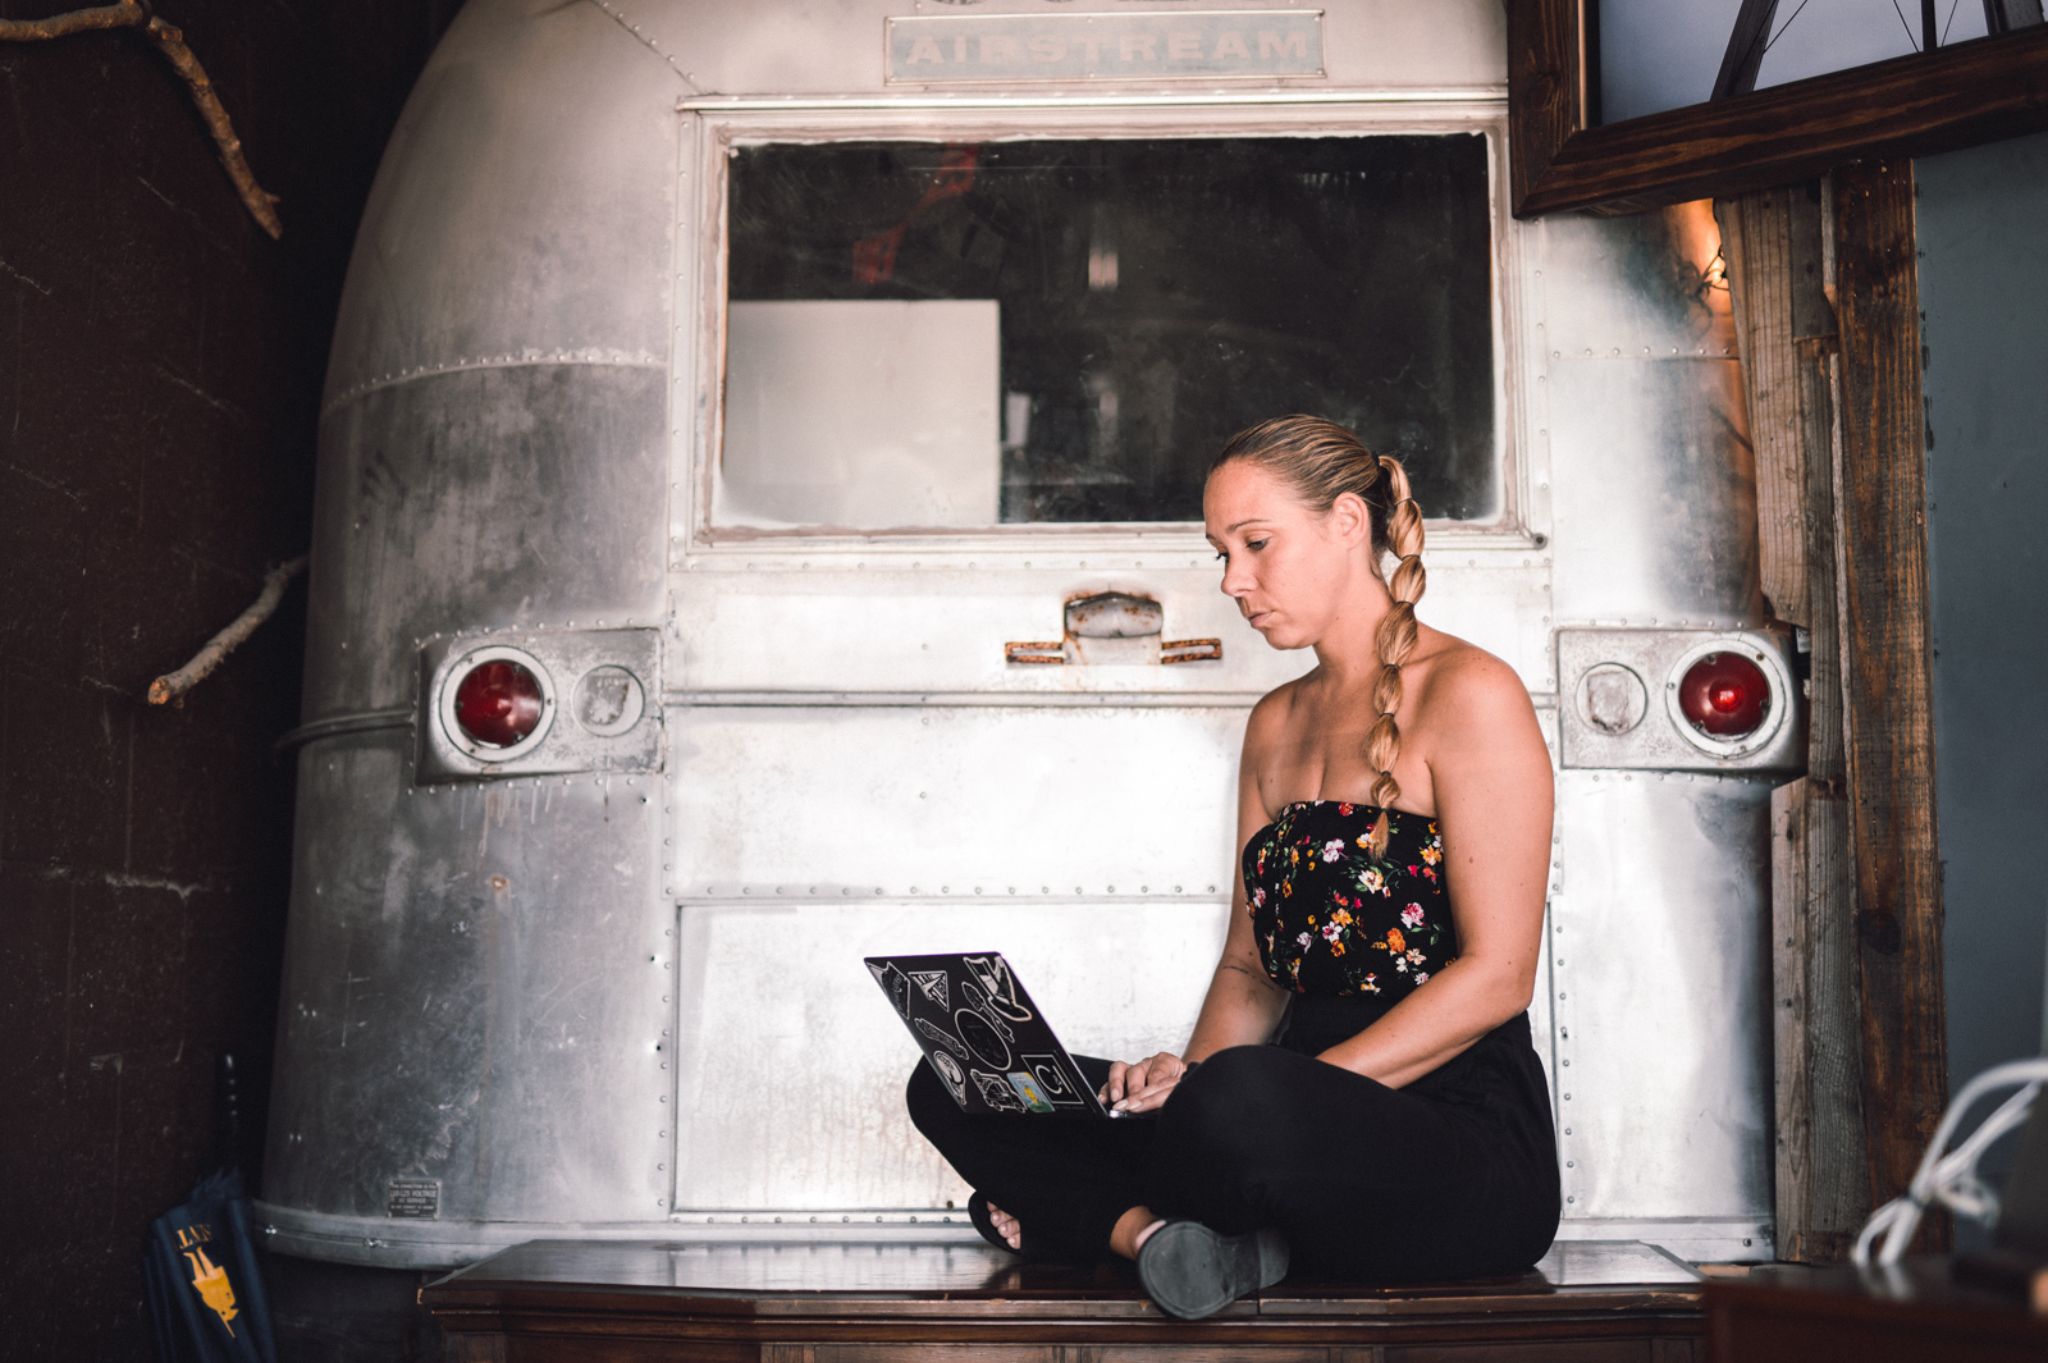 Ways to spot good filming locations Side profile of woman with long hair in a braided ponytail working on a laptop sitting behind an old metallic RV